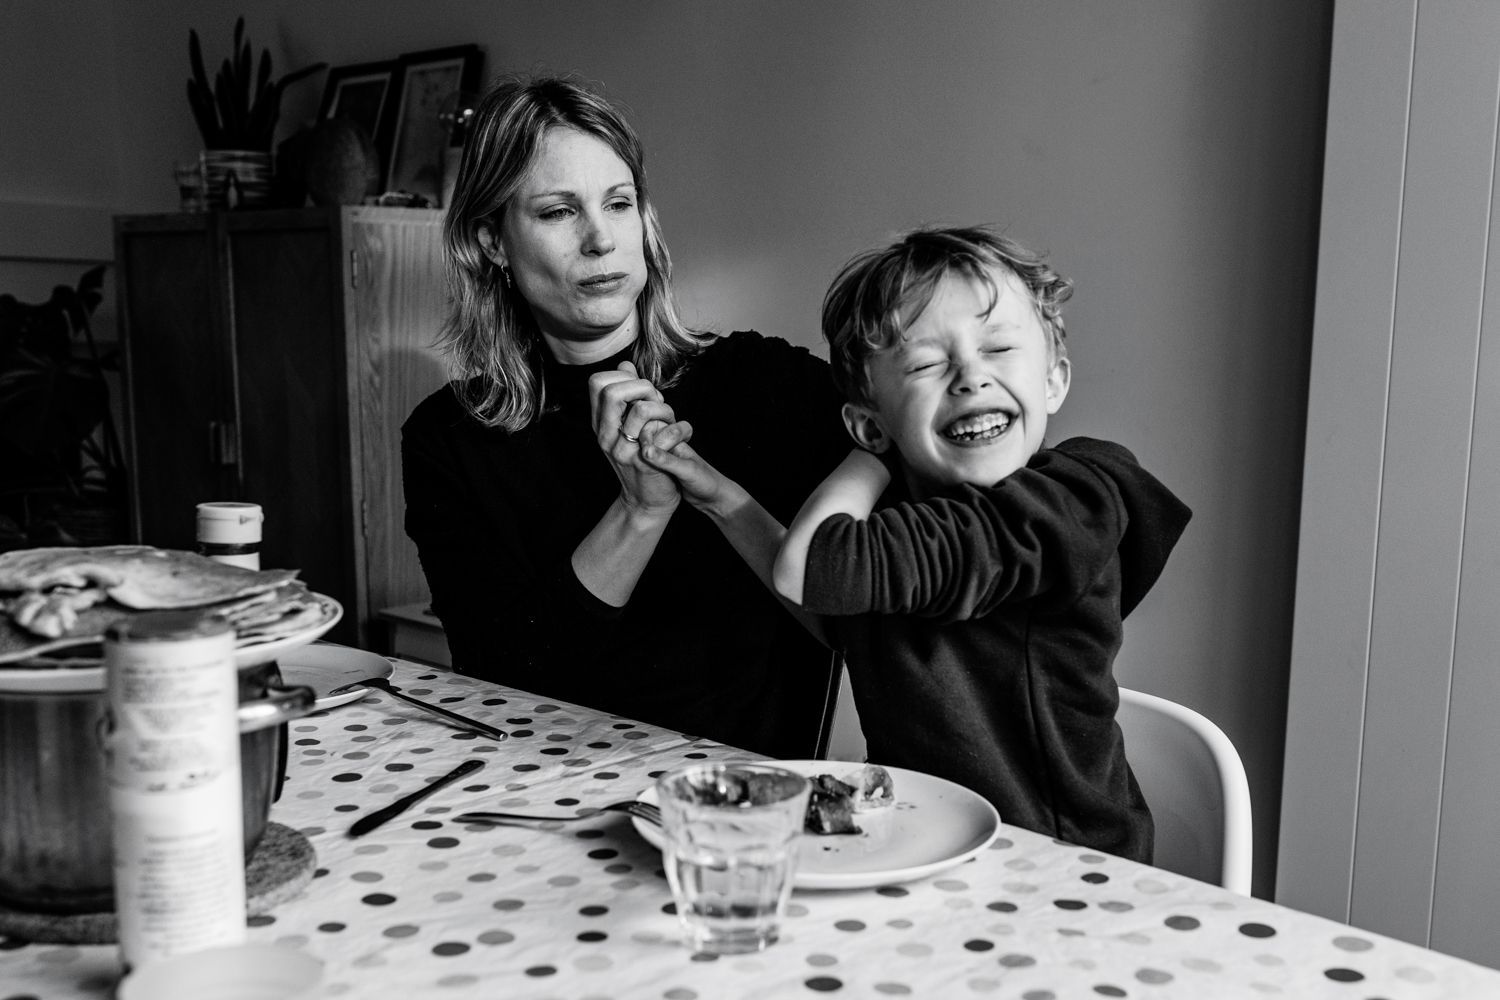 A black and white photo of a woman and a child sitting at a table.